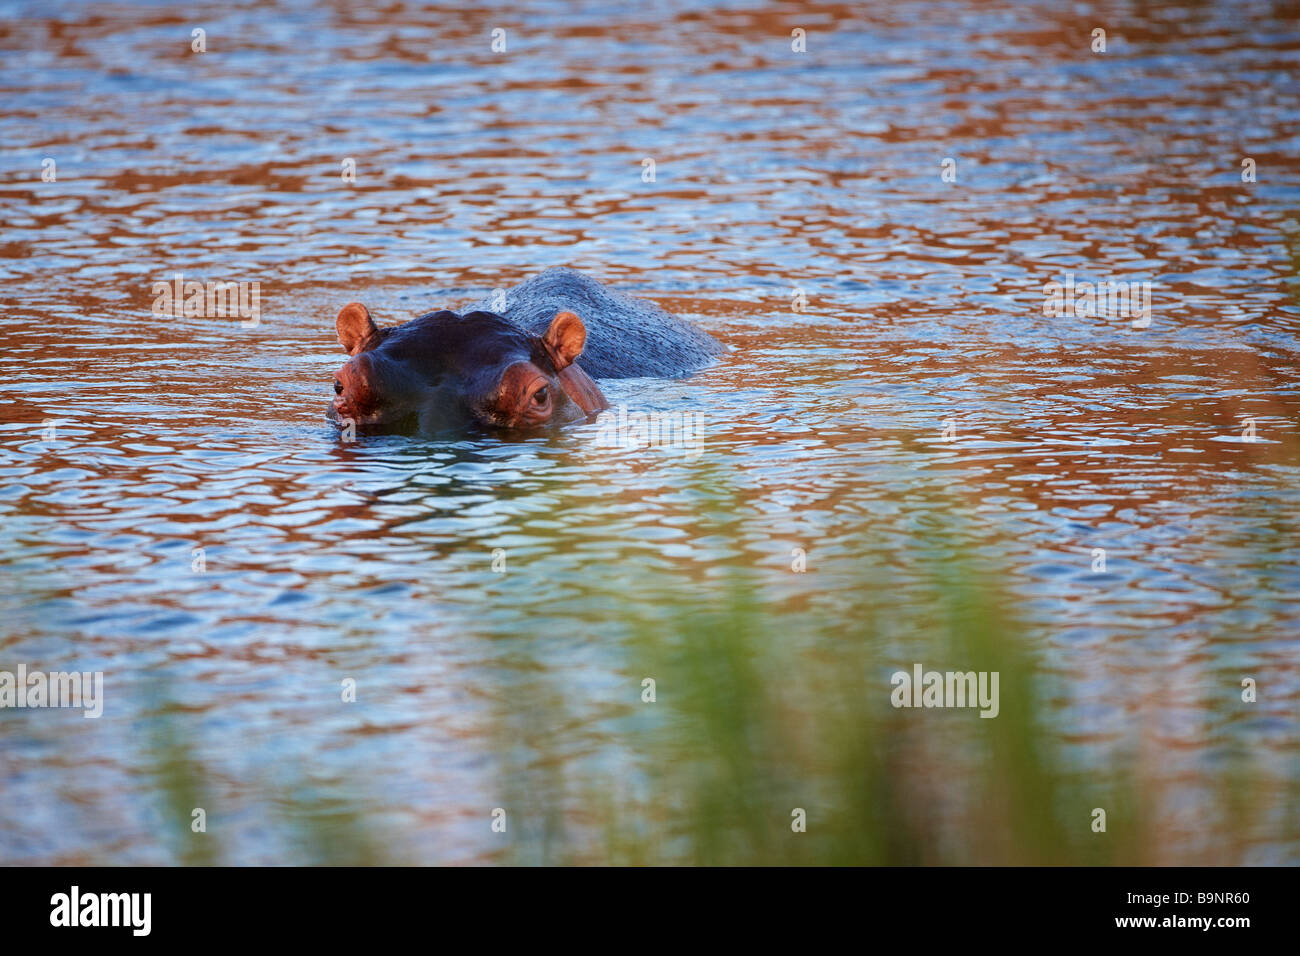 wary hippopotamus in a river, Kruger National Park, South Africa Stock Photo